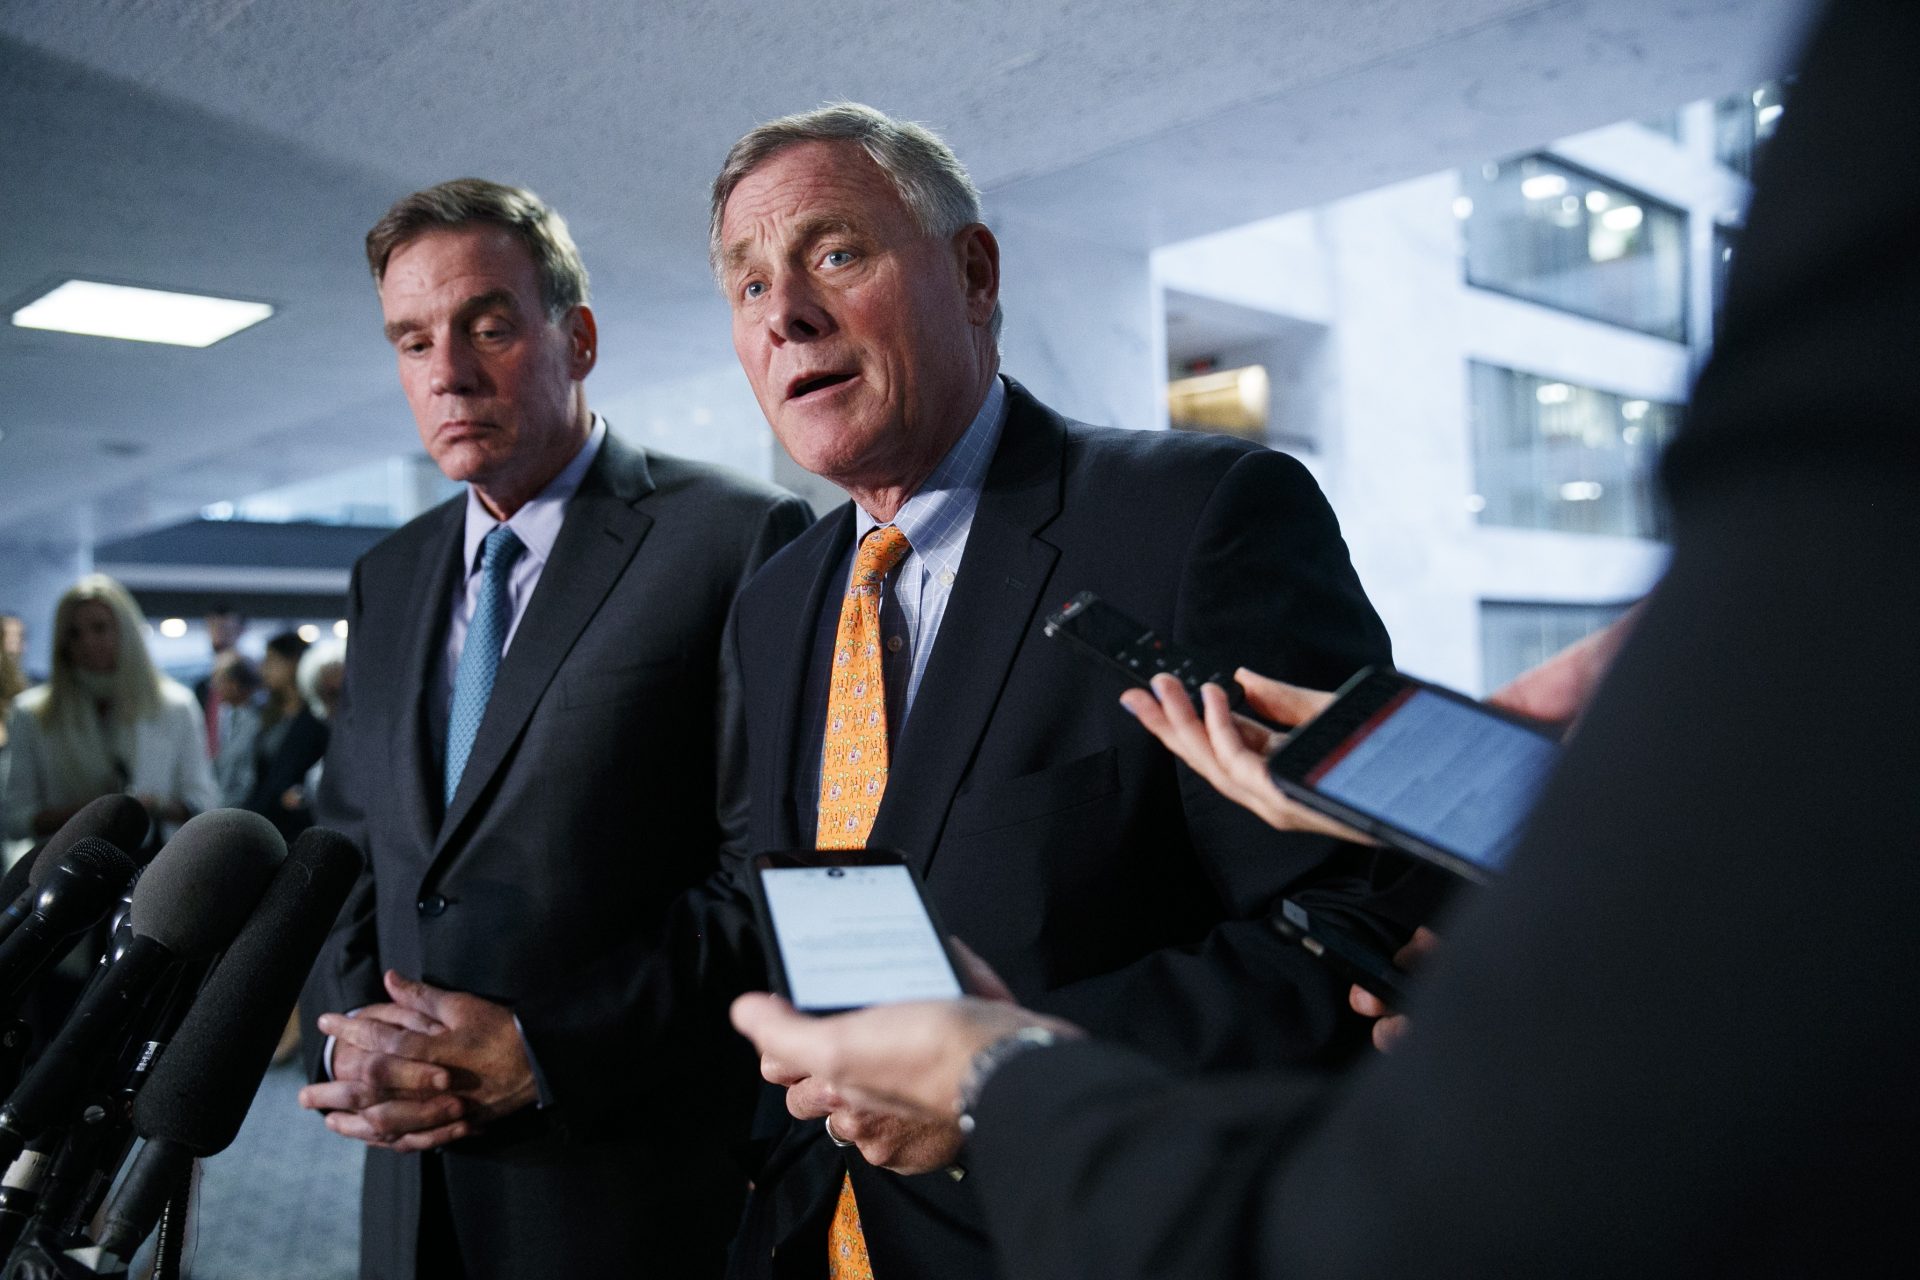 Sen. Richard Burr, R-N.C., right, chairman of the Senate Intelligence Committee, and Sen. Mark Warner, D-Va., committee vice chair, speak to the media after receiving closed briefings from Acting Director of National Intelligence Joseph Maguire and national intelligence inspector general Michael Atkinson, Thursday Sept. 26, 2019, on Capitol Hill in Washington.